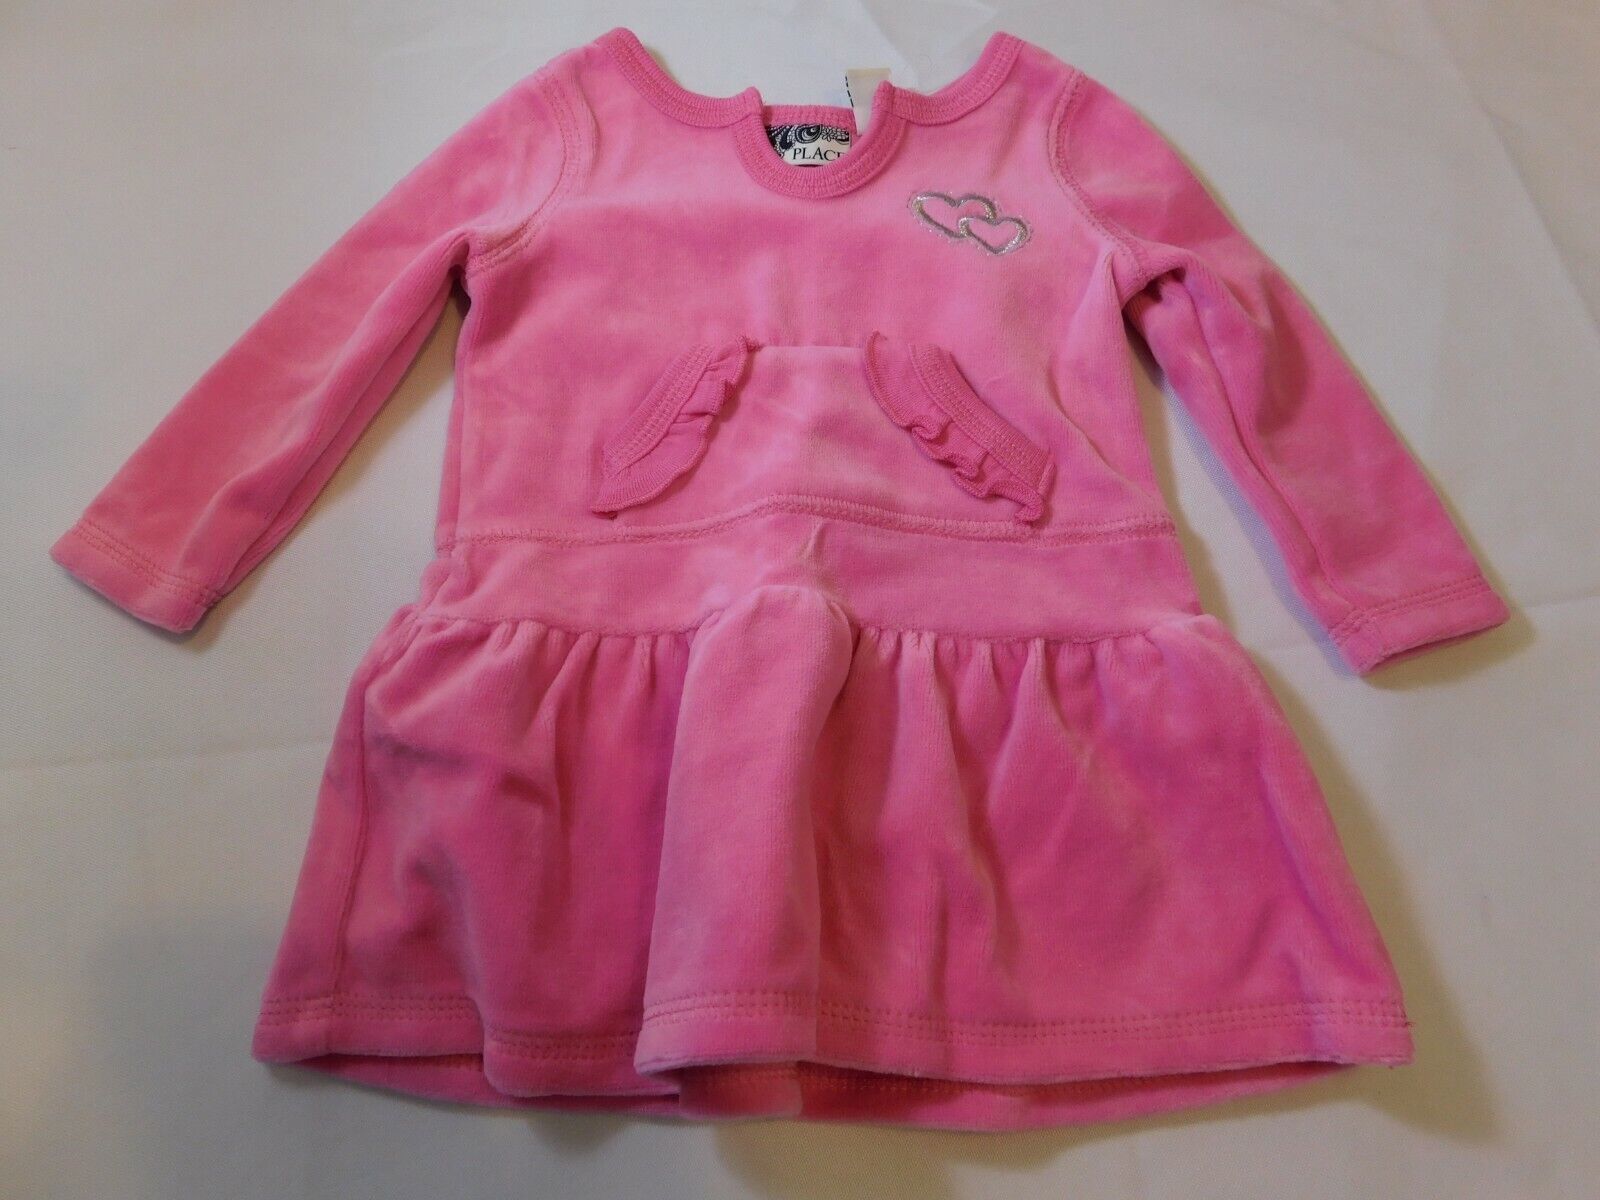 The Children's Place Girl's Baby Dress Pink Hearts Velour Size Variations NWT - $12.86